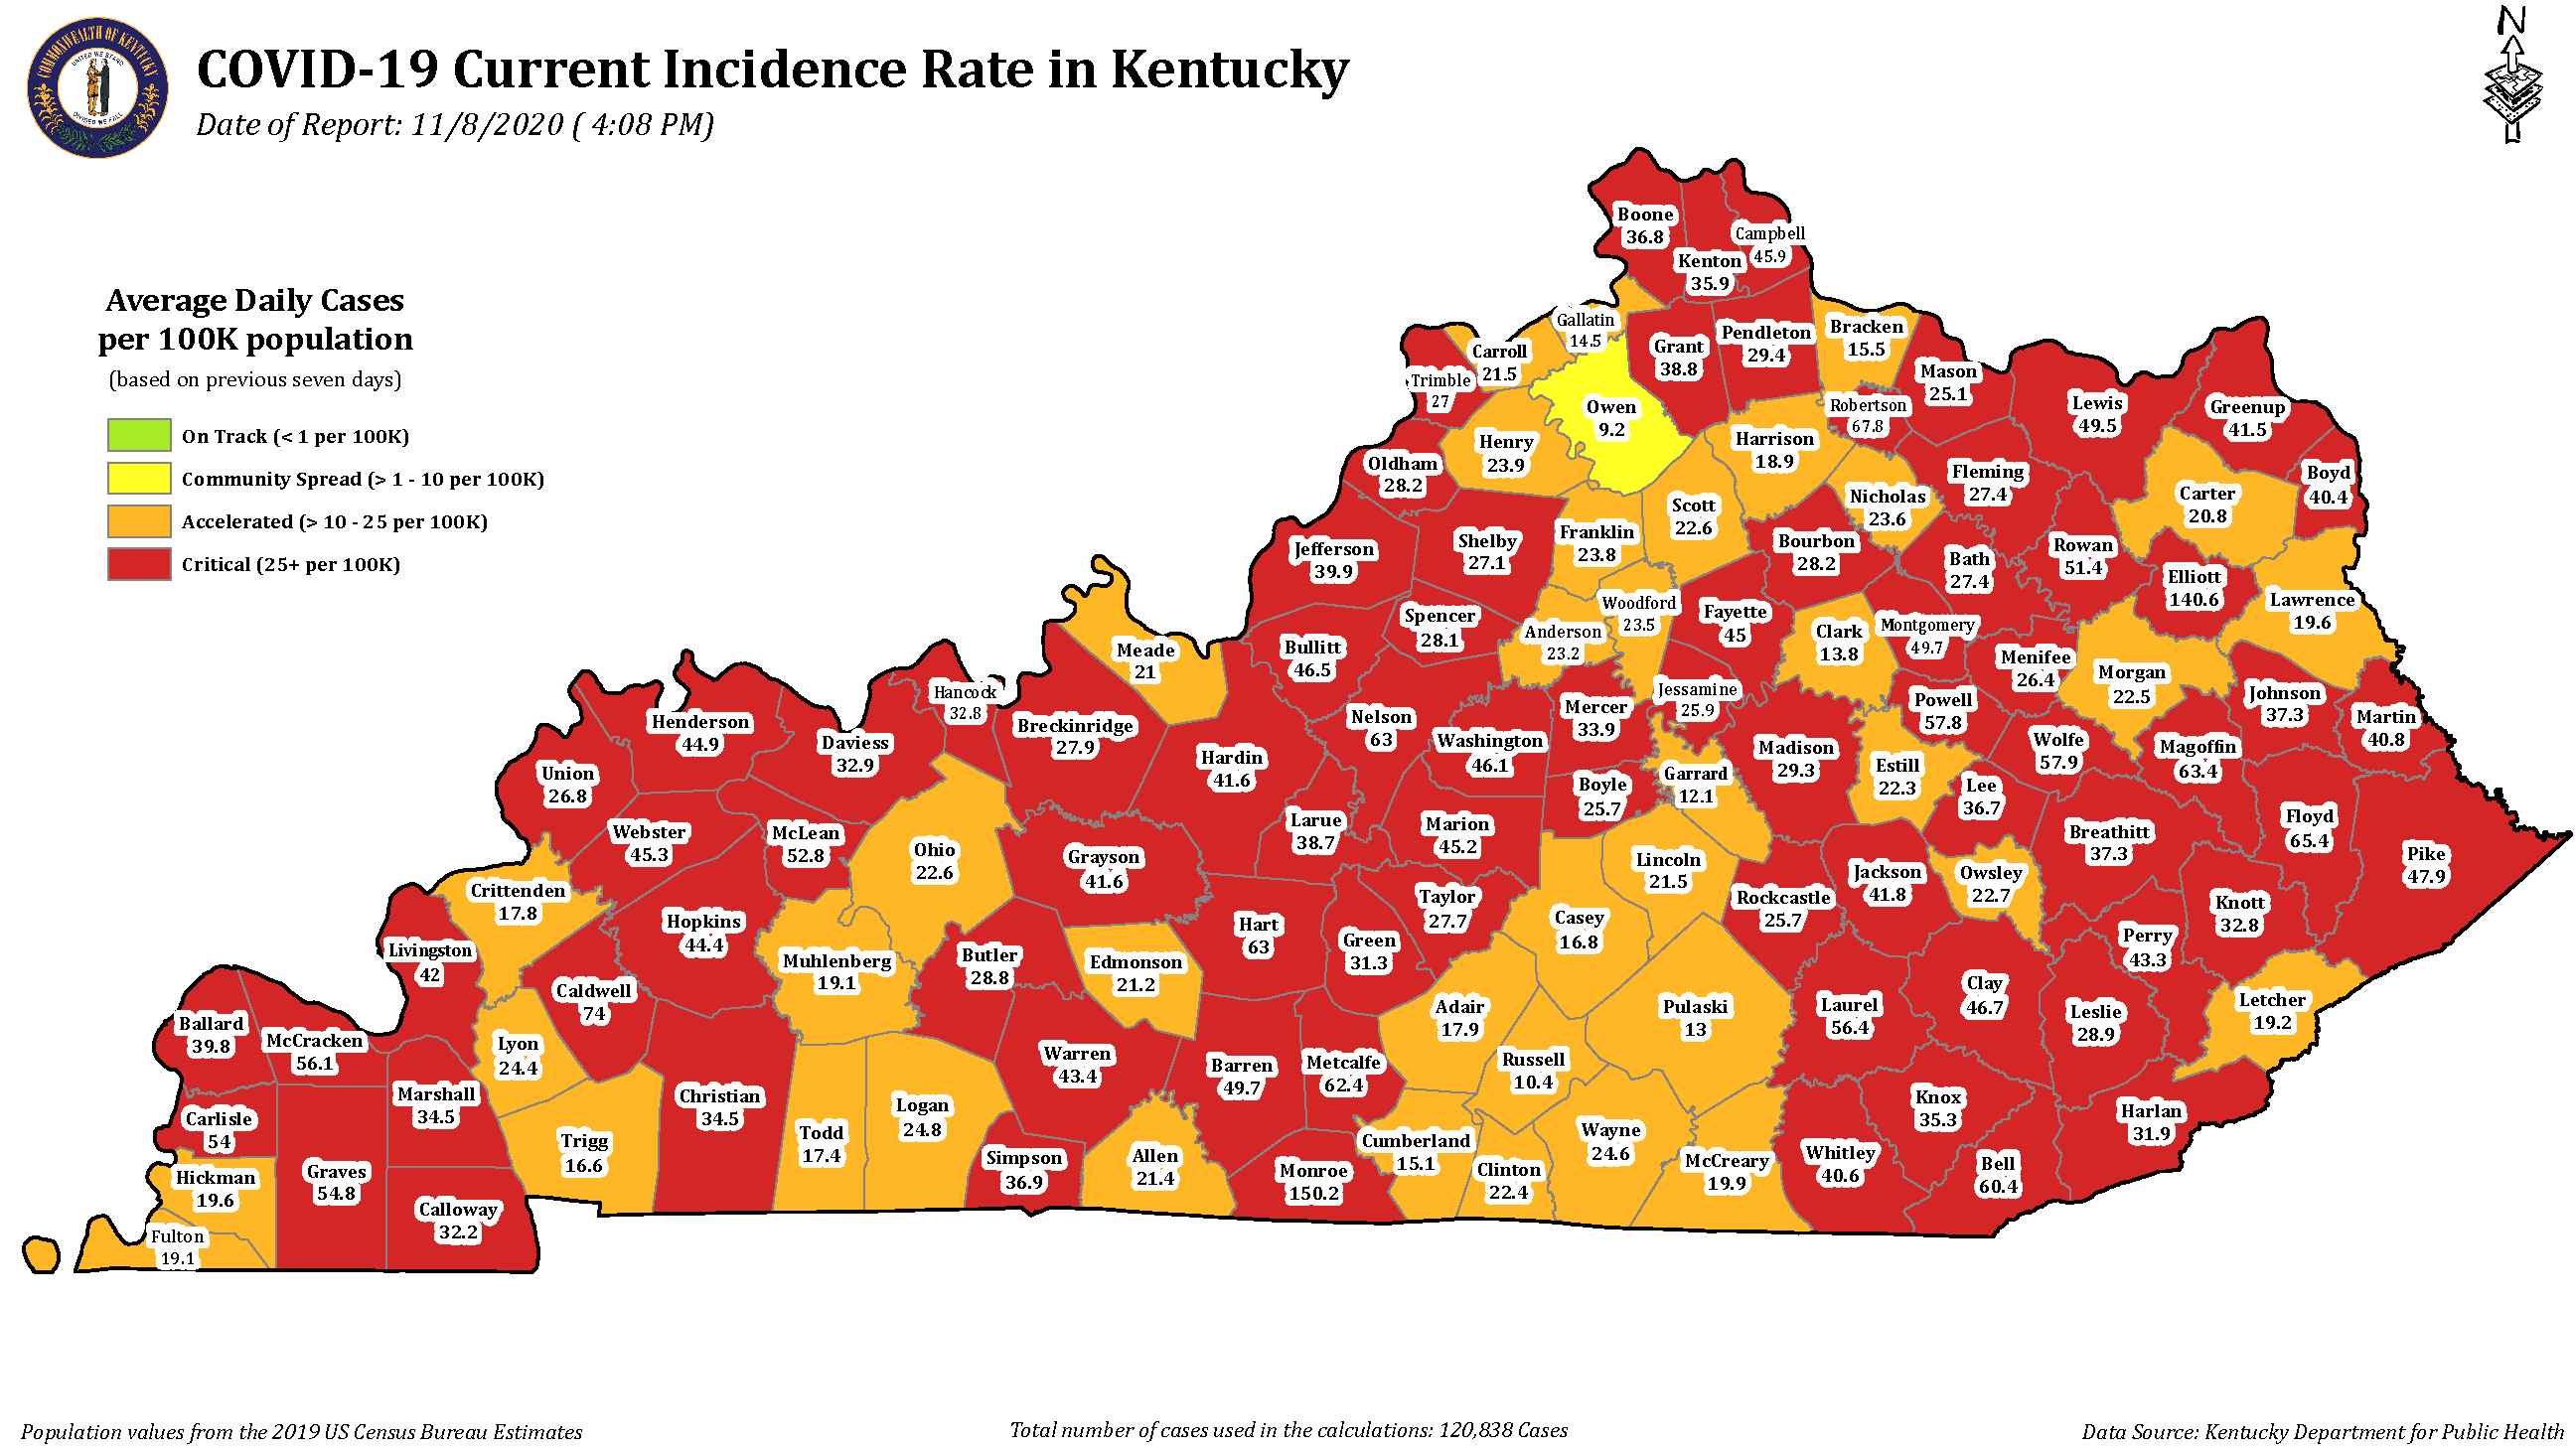 Kentucky sets new weekly record for COVID cases